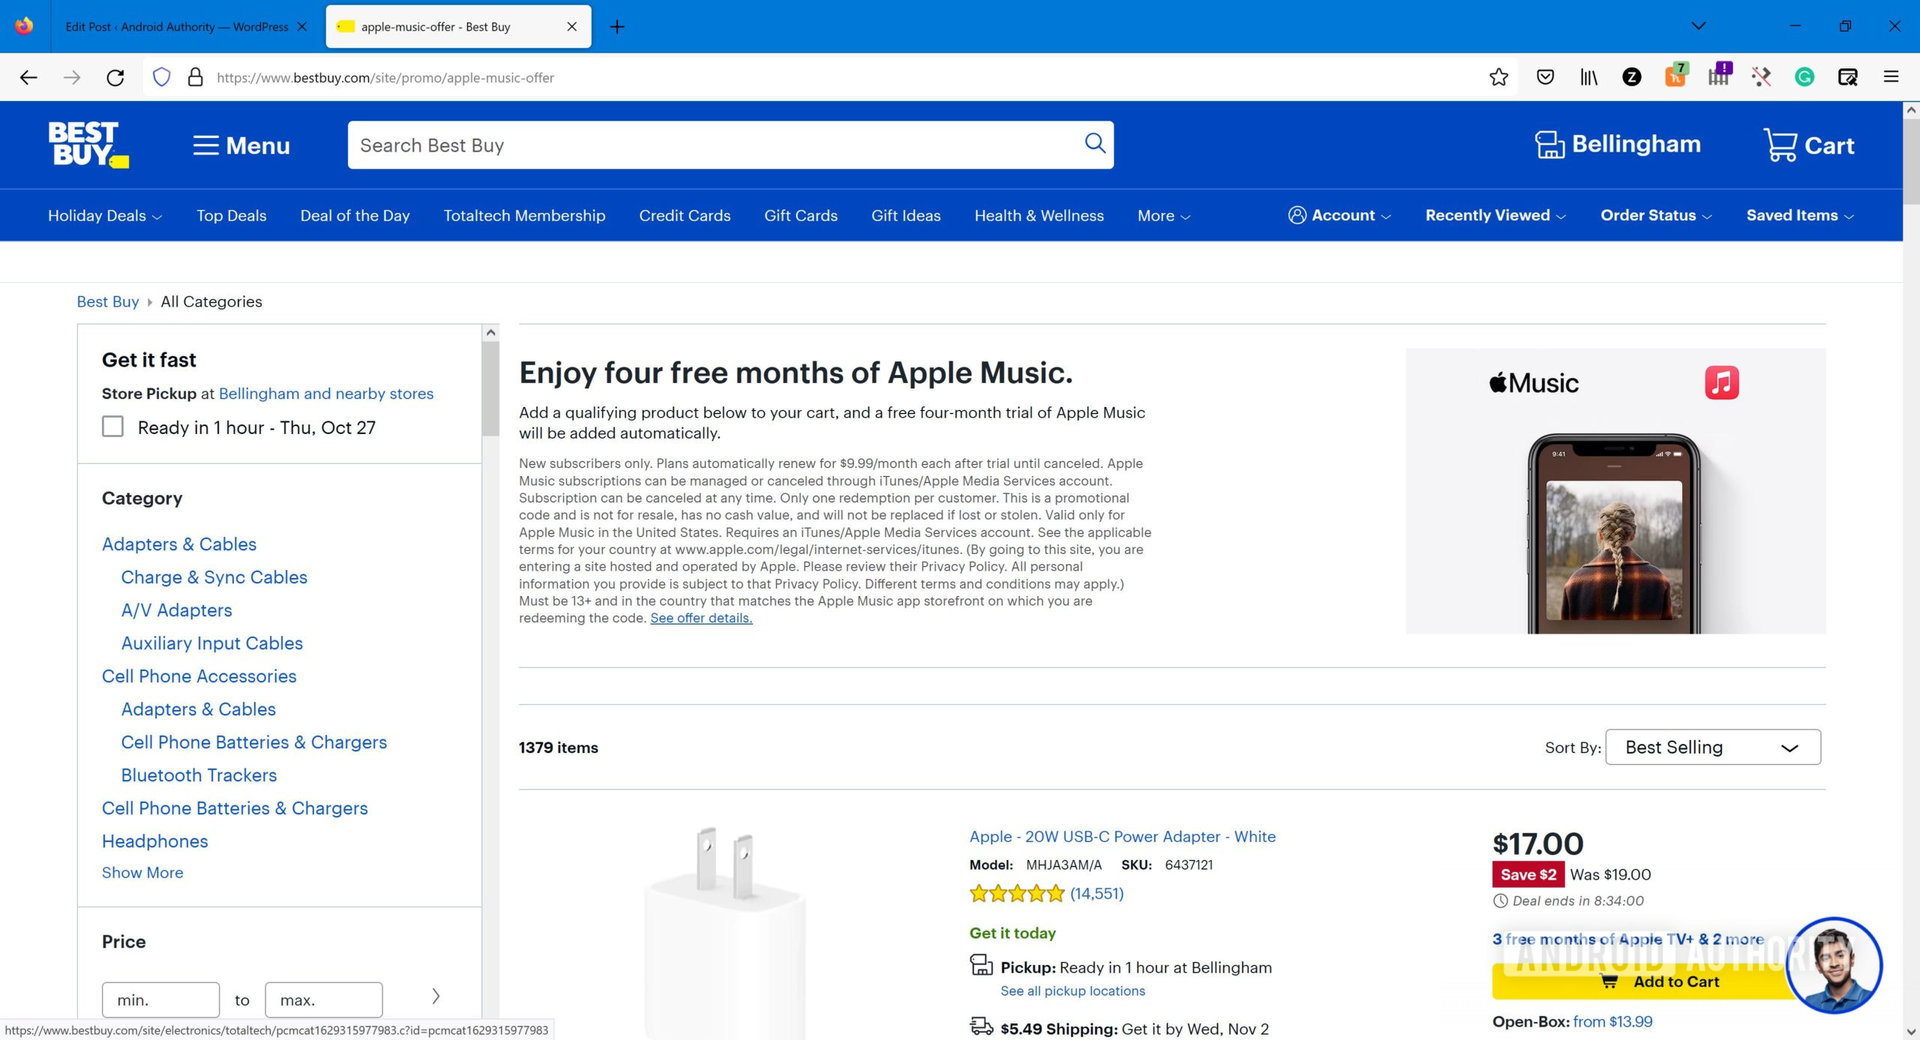 A screenshot of the Best Buy page listing products eligible to receive a free four-month Apple Music subscription upon purchase.